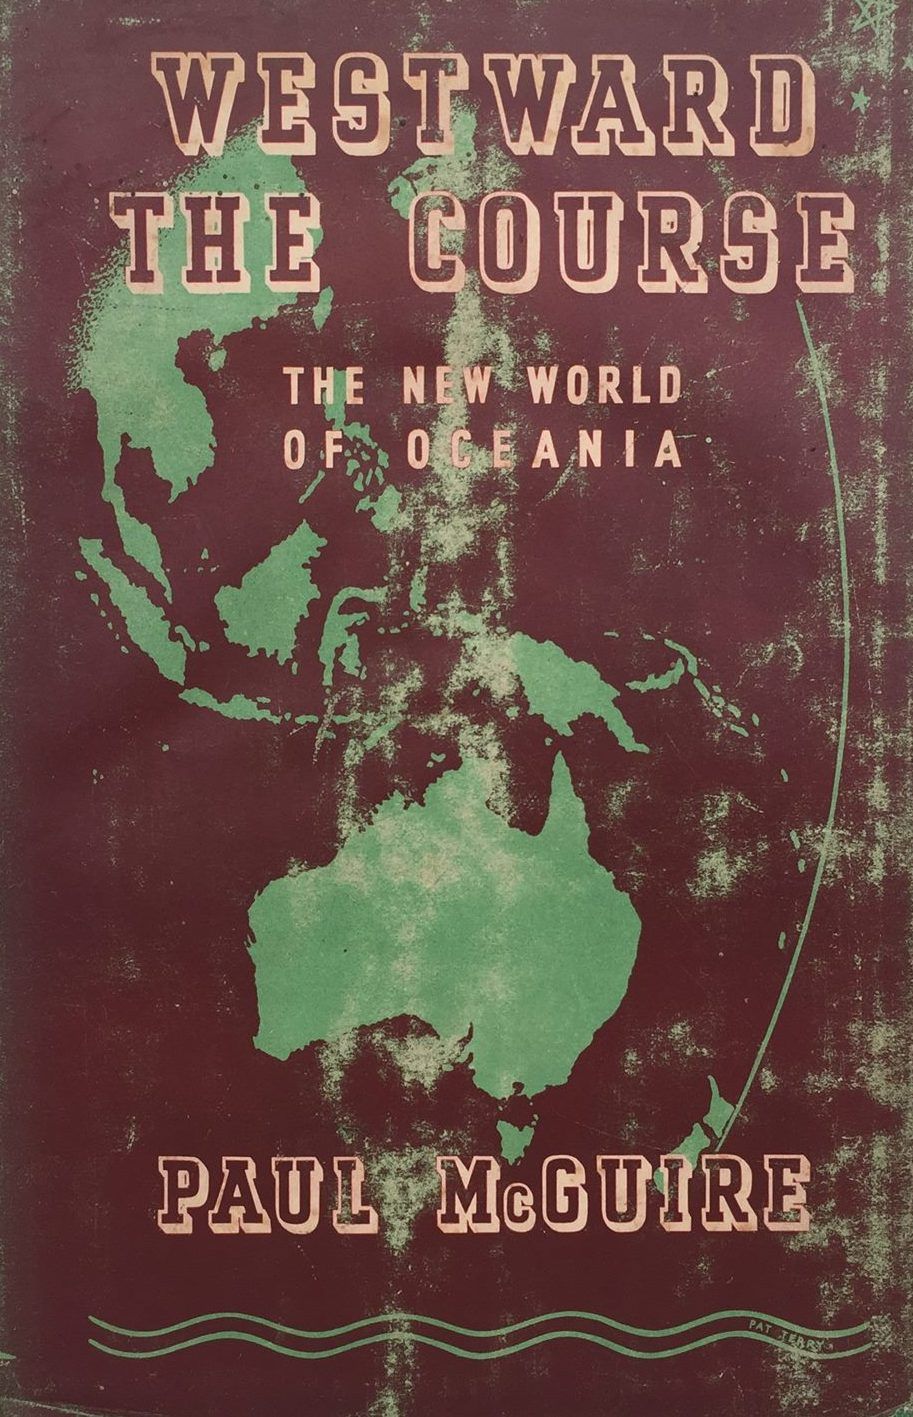 WESTWARD THE COURSE: The New World of Oceania